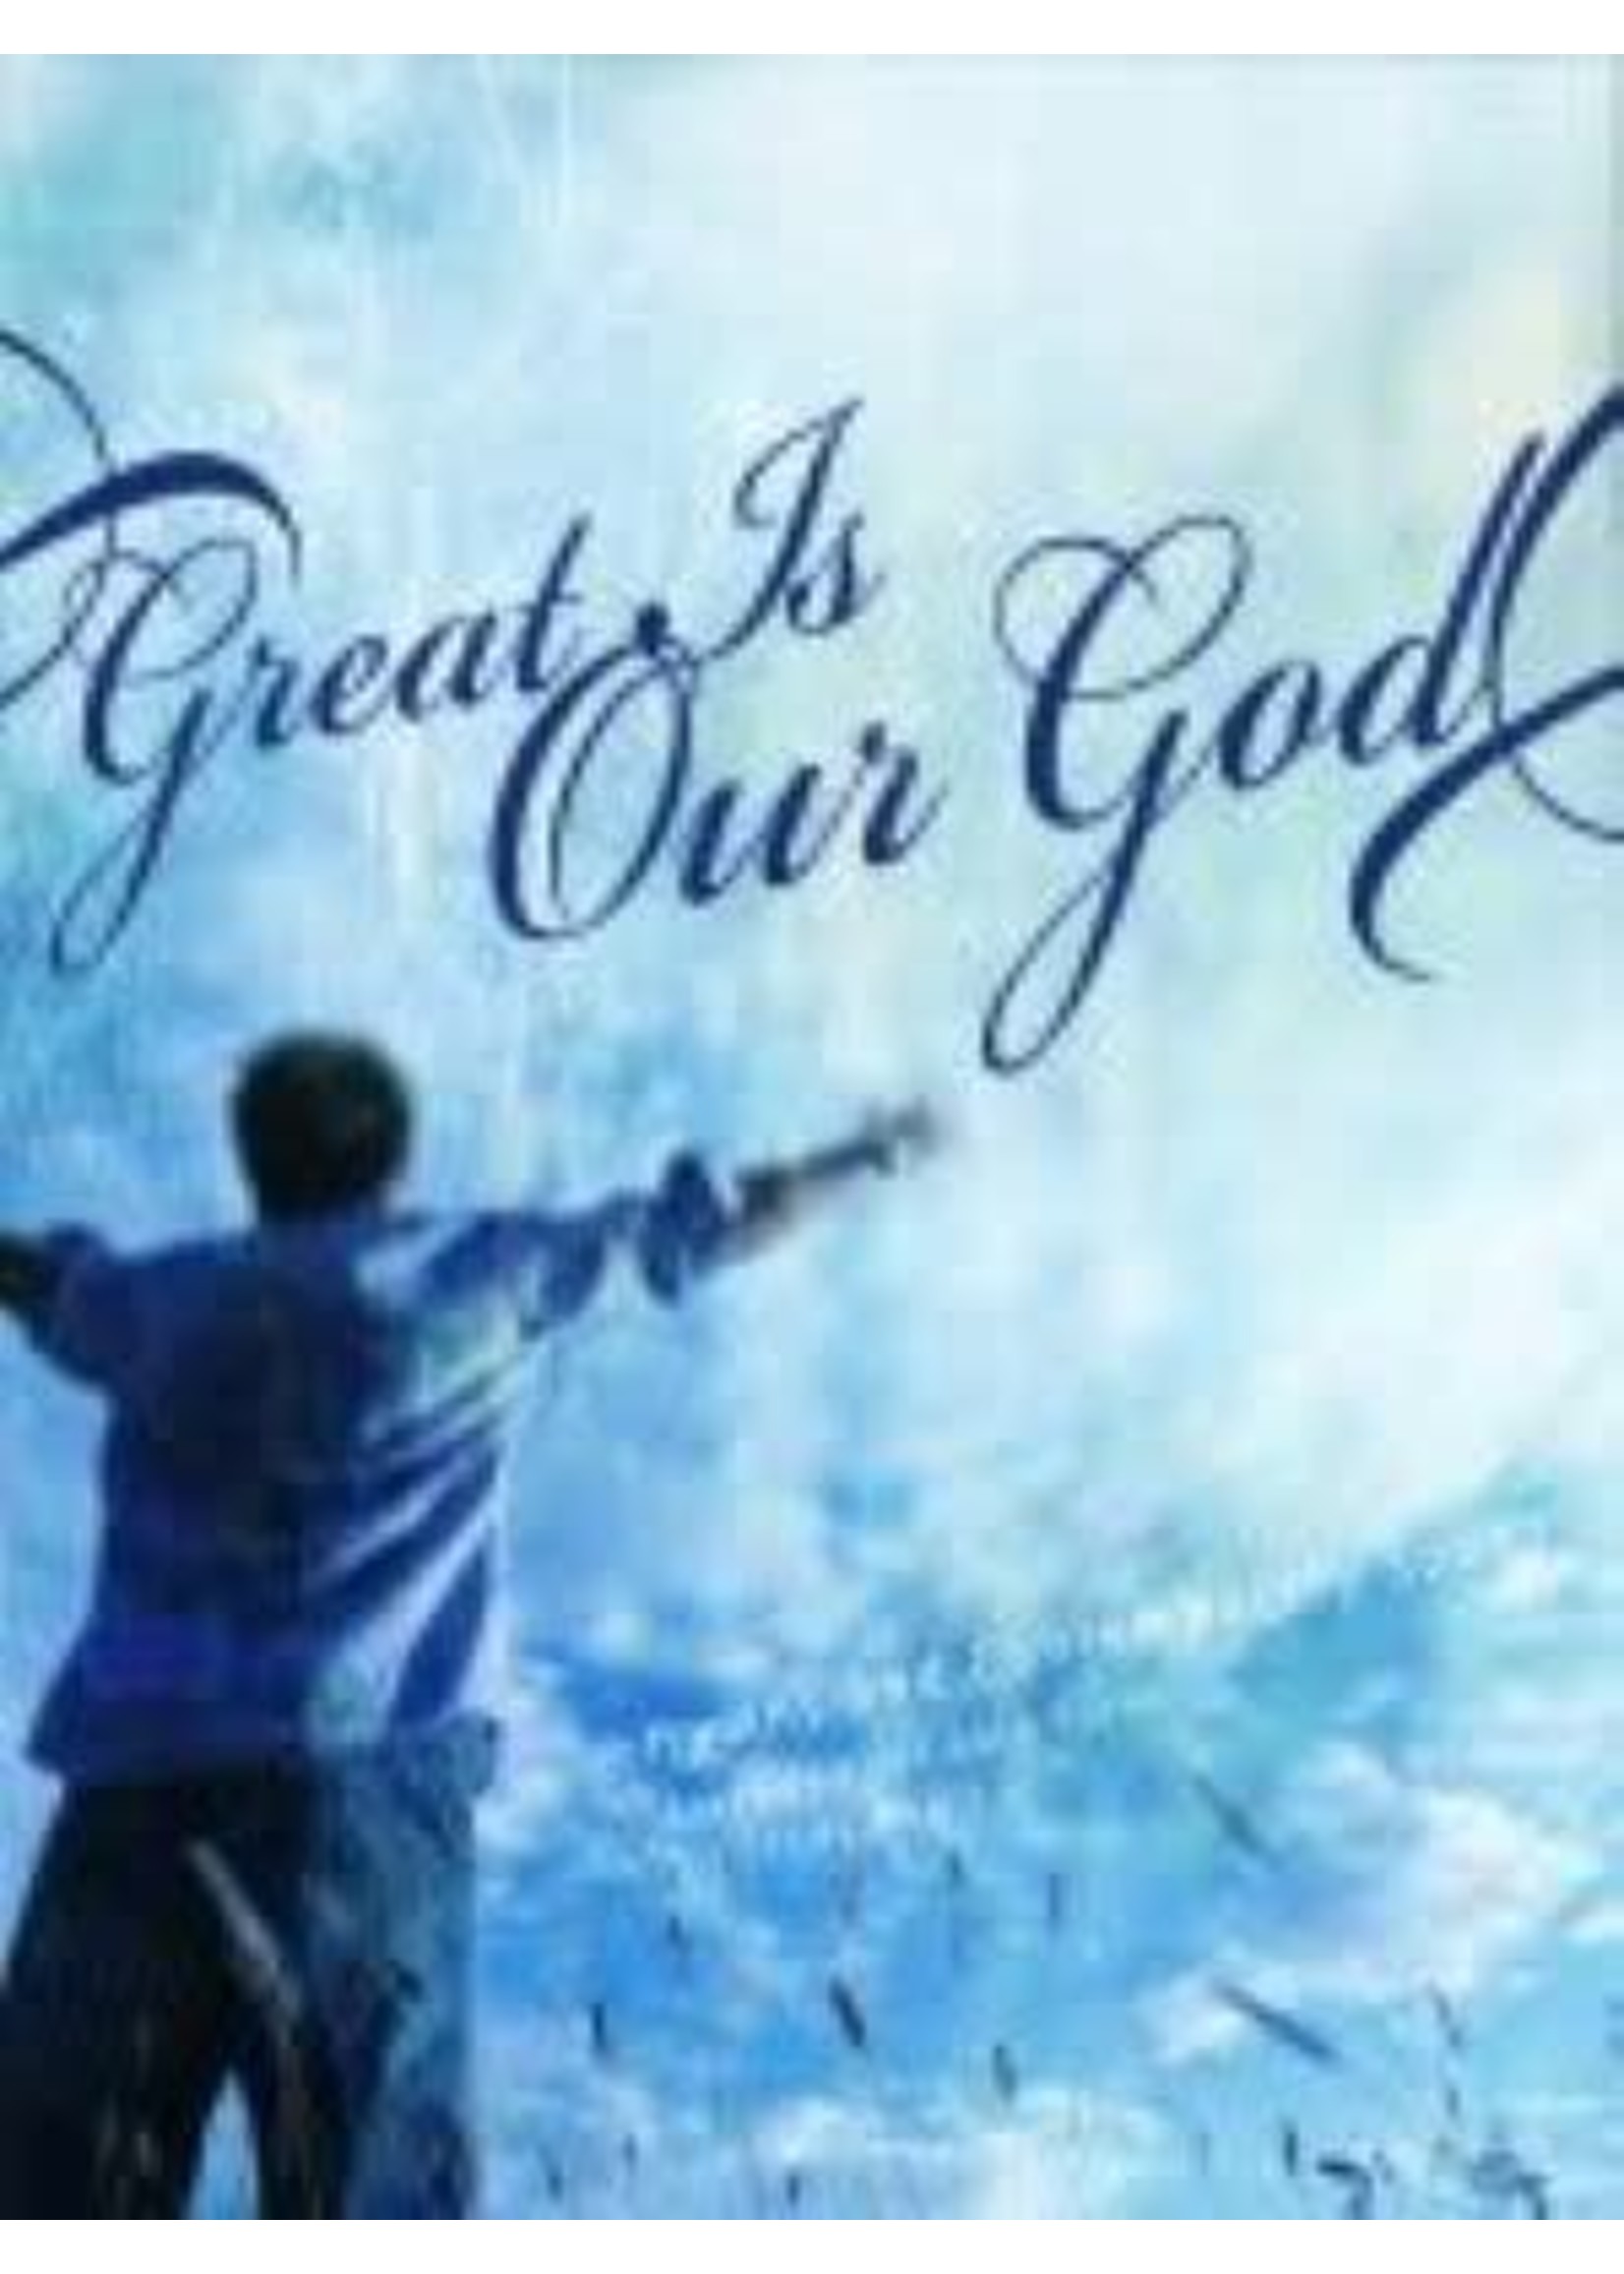 Great is Our God